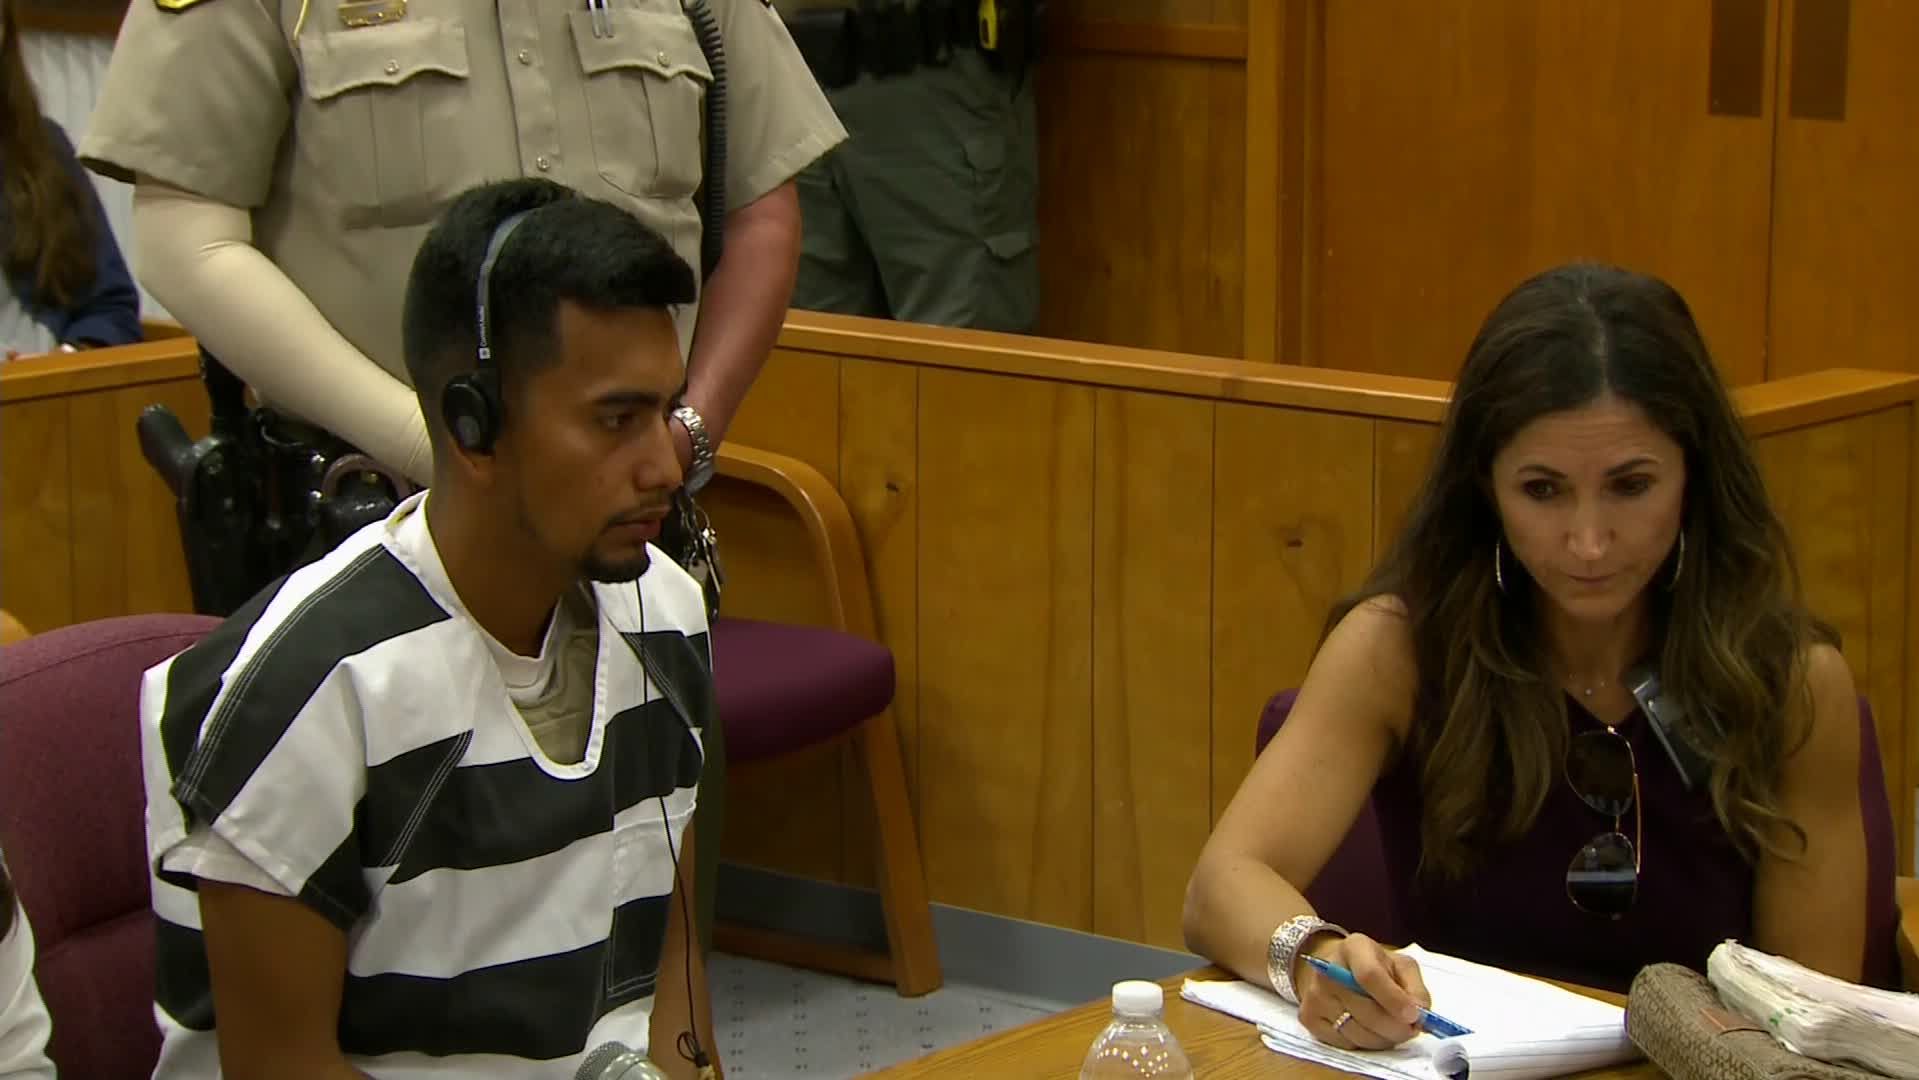 Cristhian Rivera was charged with the murder of Mollie Tibbetts, a 20-year-old college student, in an Iowa court on Wednesday, August 22, 2018.